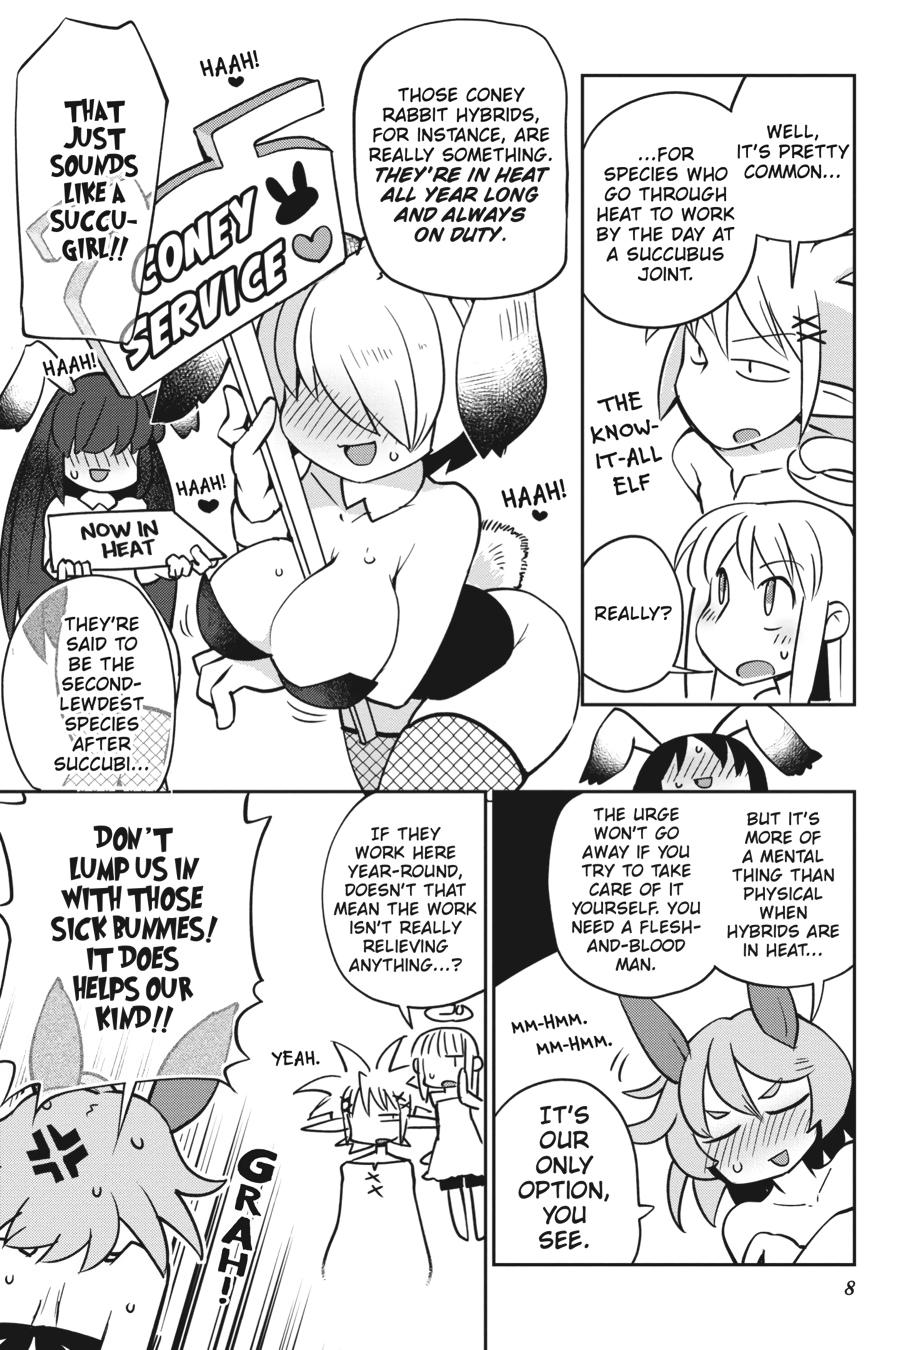 Gay Skinny Interspecies Reviewers - Volume 3 - Ishuzoku reviewers Clothed - Page 9